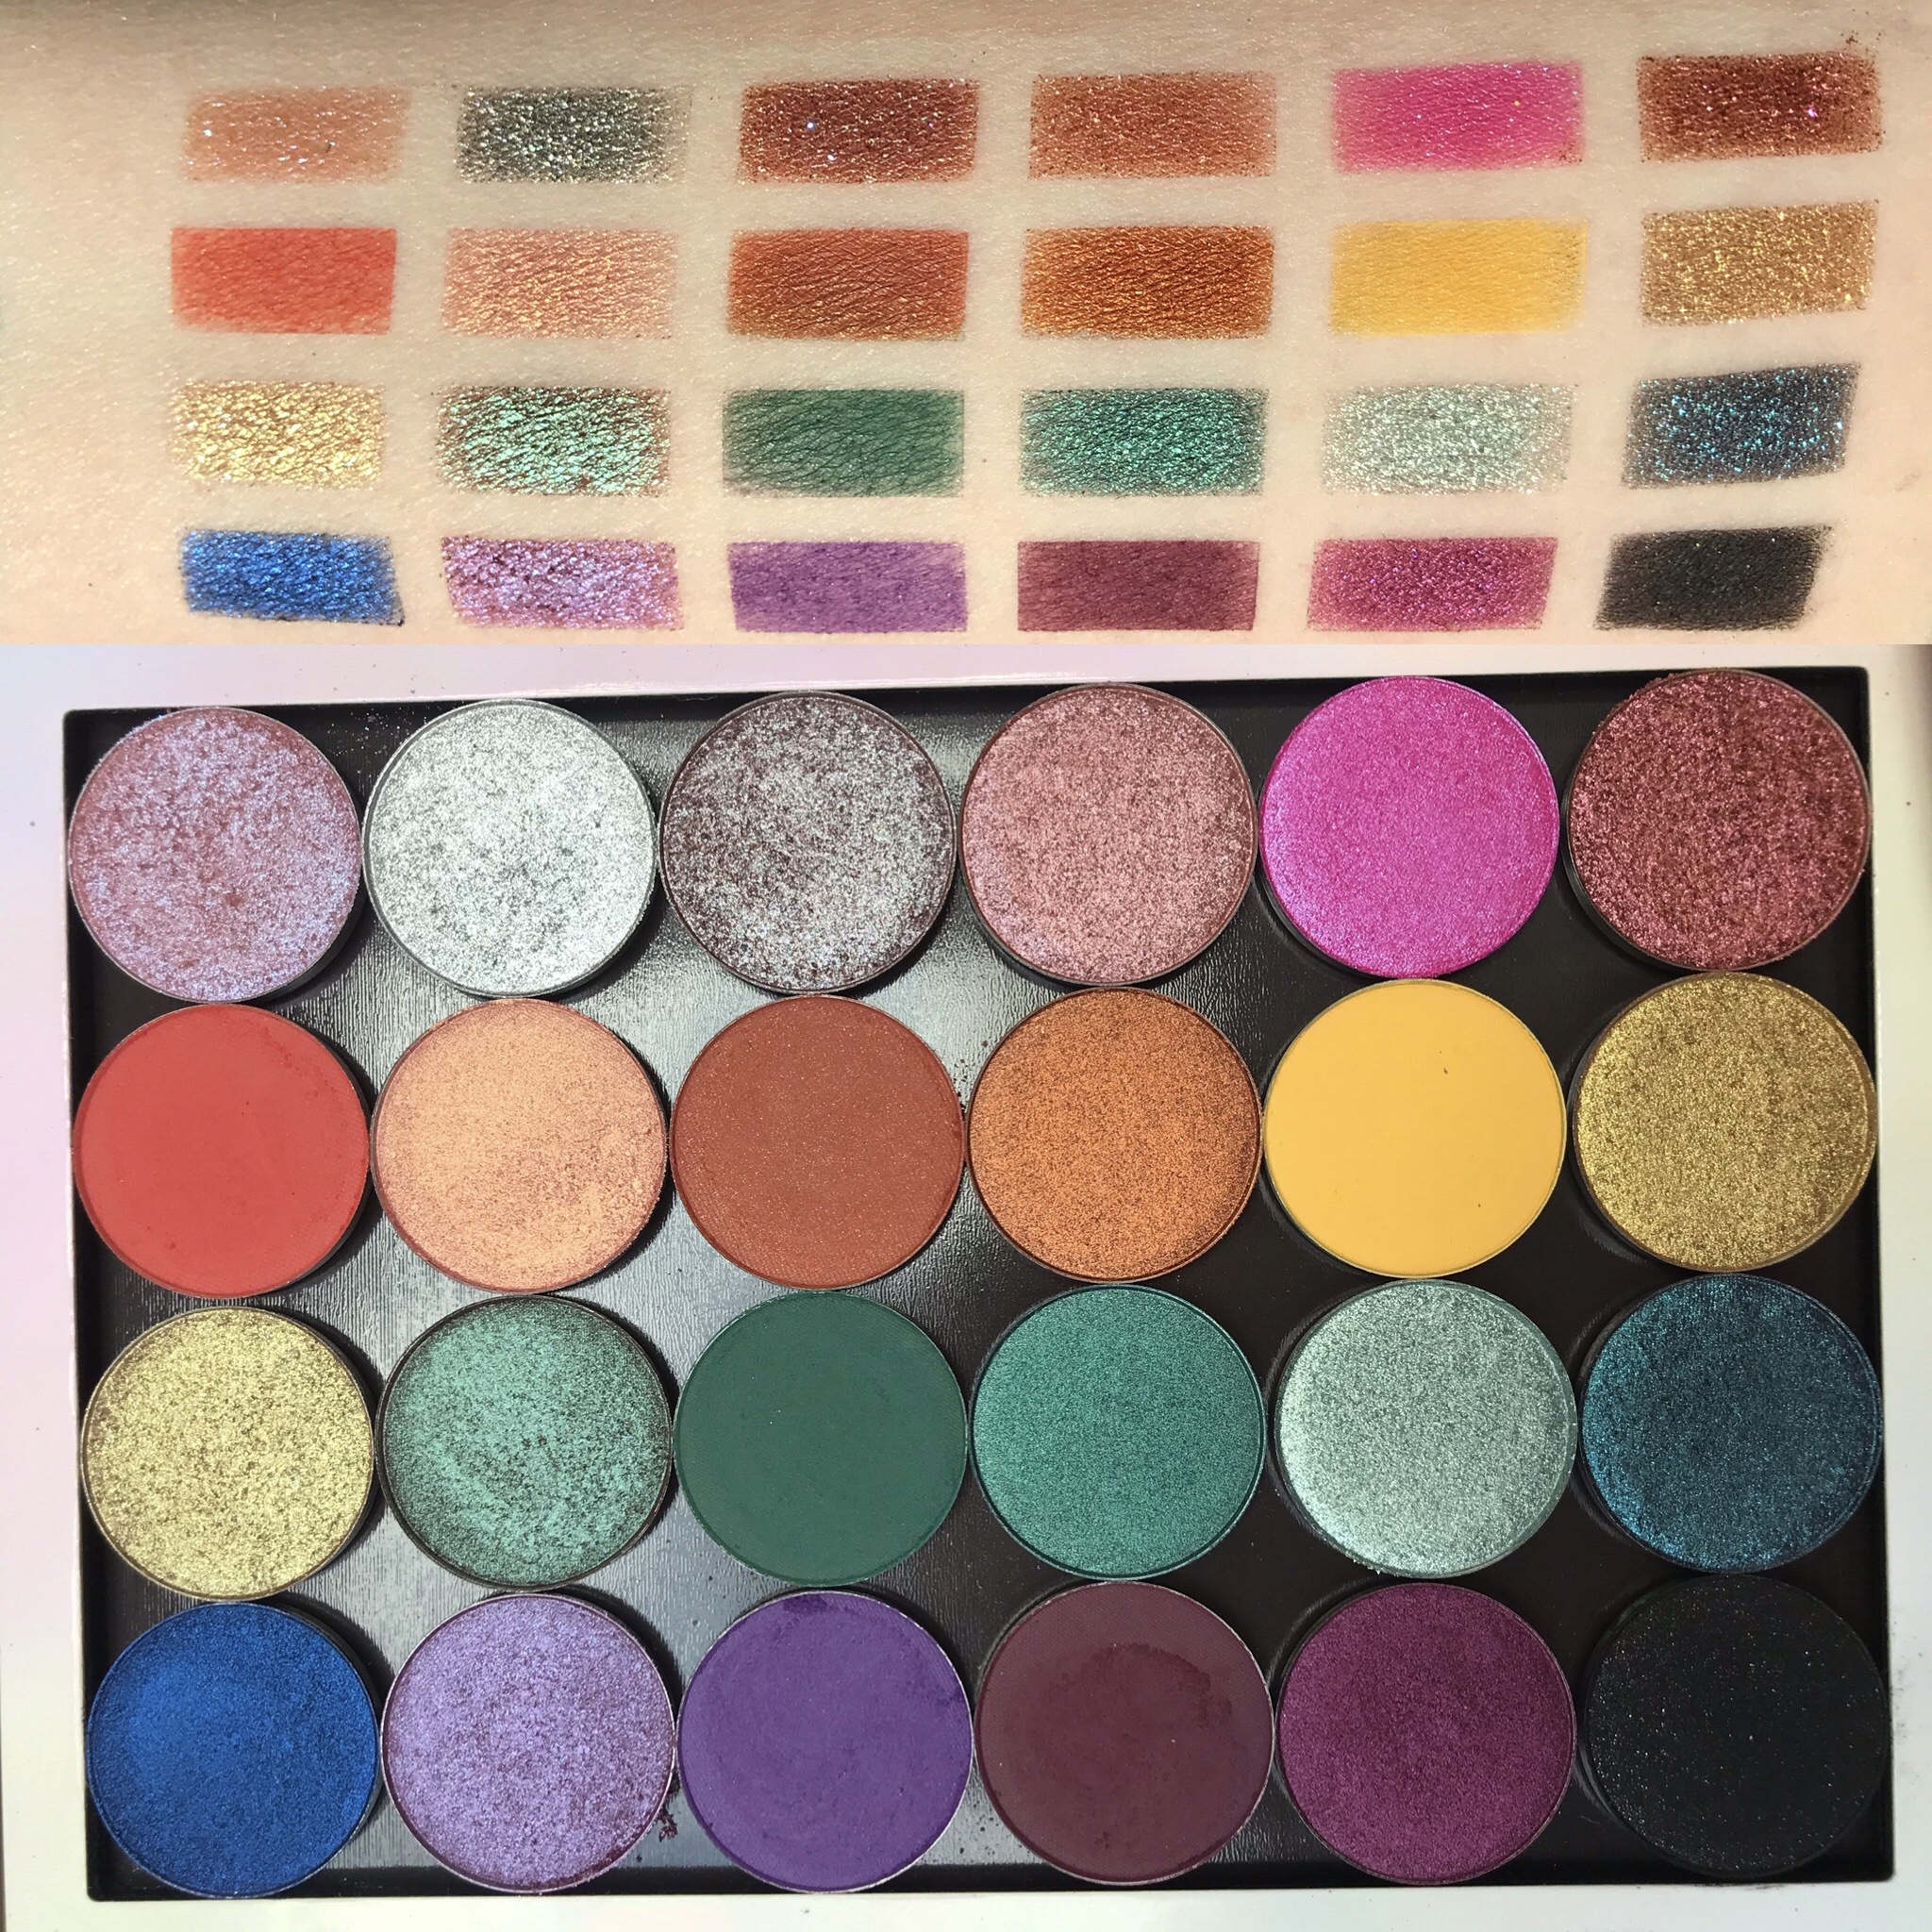 Left to Right, Top to Bottom:&nbsp; Earthshine.&nbsp;On a whimsy, Mr. Sandman,&nbsp;Misty, Solstice with the mostest, Thank U next,&nbsp;Meteorite, Over it, Martian,&nbsp;Crackle, Take Flight , Karate cake, Baby lights,&nbsp;Wishful winking, Conjour up, Superzoom, Heavenly, Antimatter, Quantum sleep, Neutrino,&nbsp;Try me,&nbsp;Sleeper,&nbsp;Paradiso, Nightdream